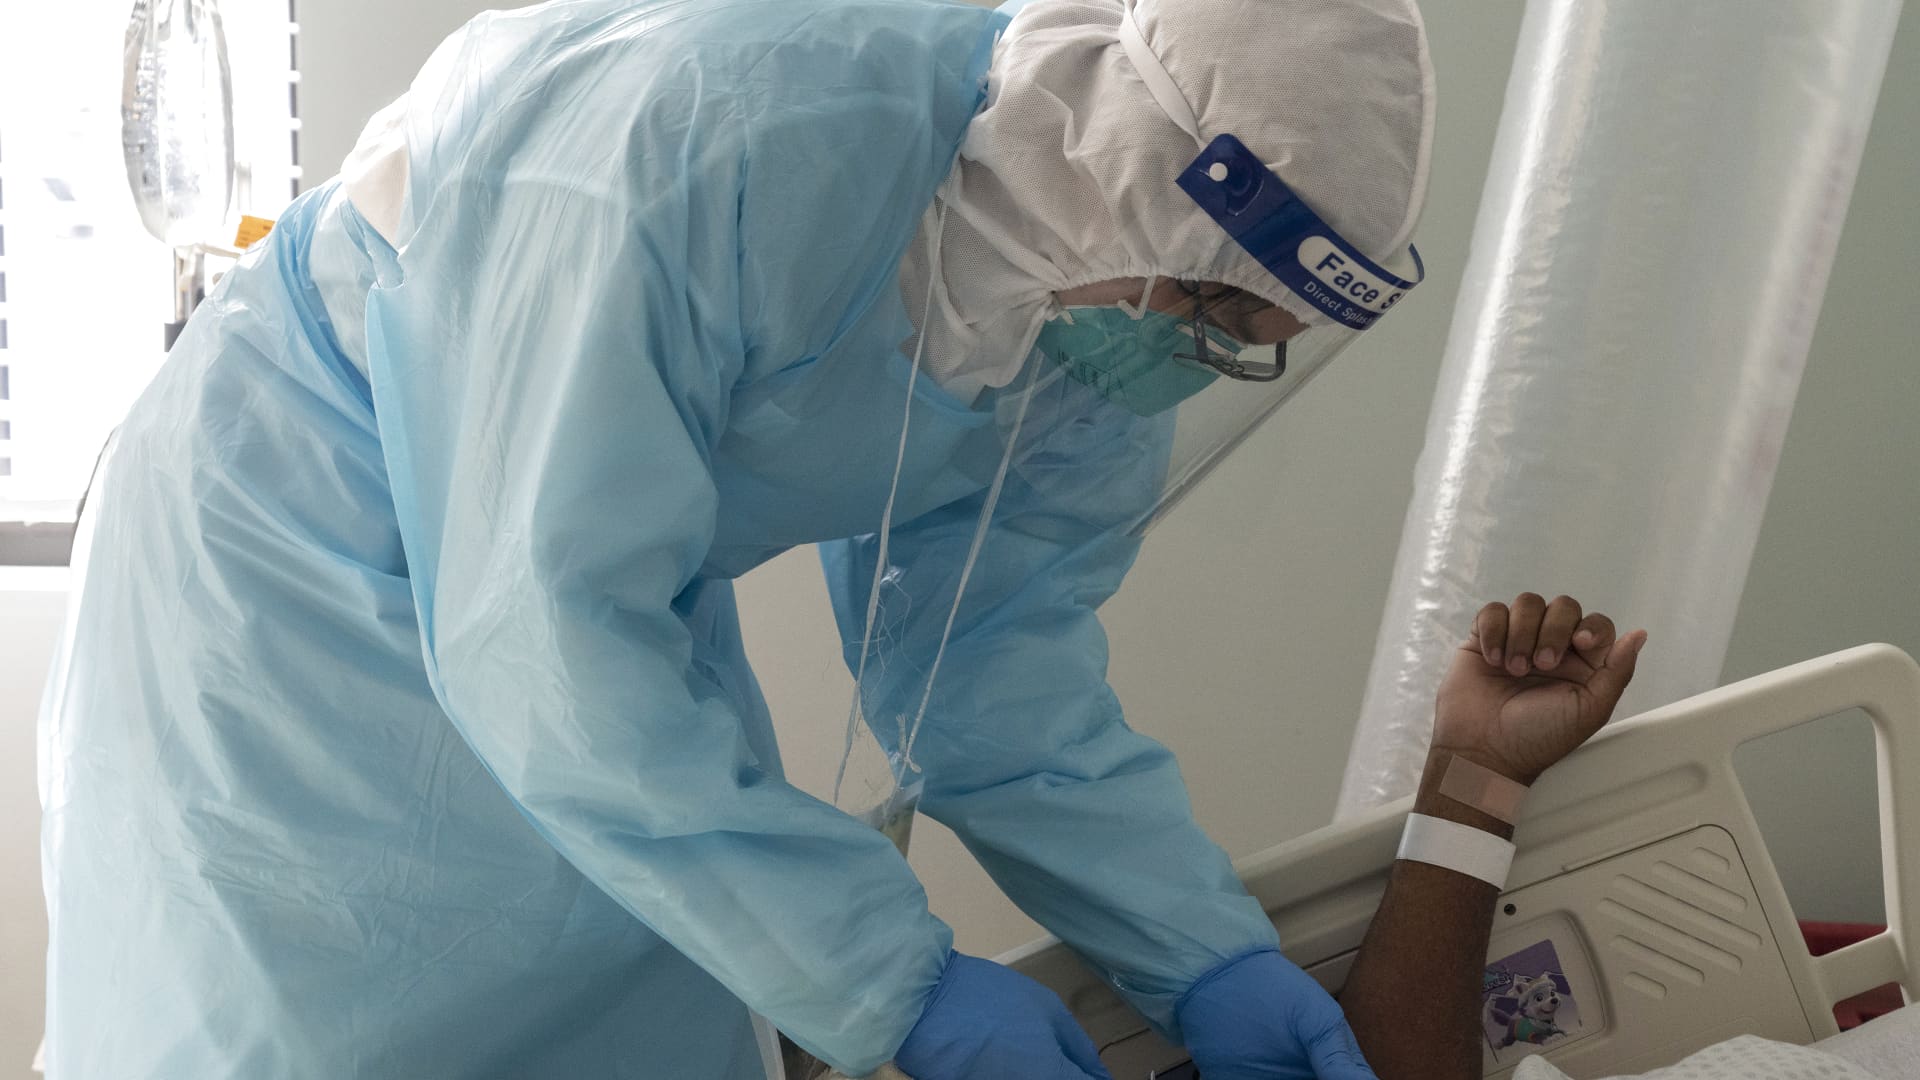 A medical staff member Cesar Barrera takes a blood sample from a patient suffering from the coronavirus disease (COVID-19) in the COVID-19 intensive care unit (ICU) at the United Memorial Medical Center on November 22, 2020 in Houston, Texas.